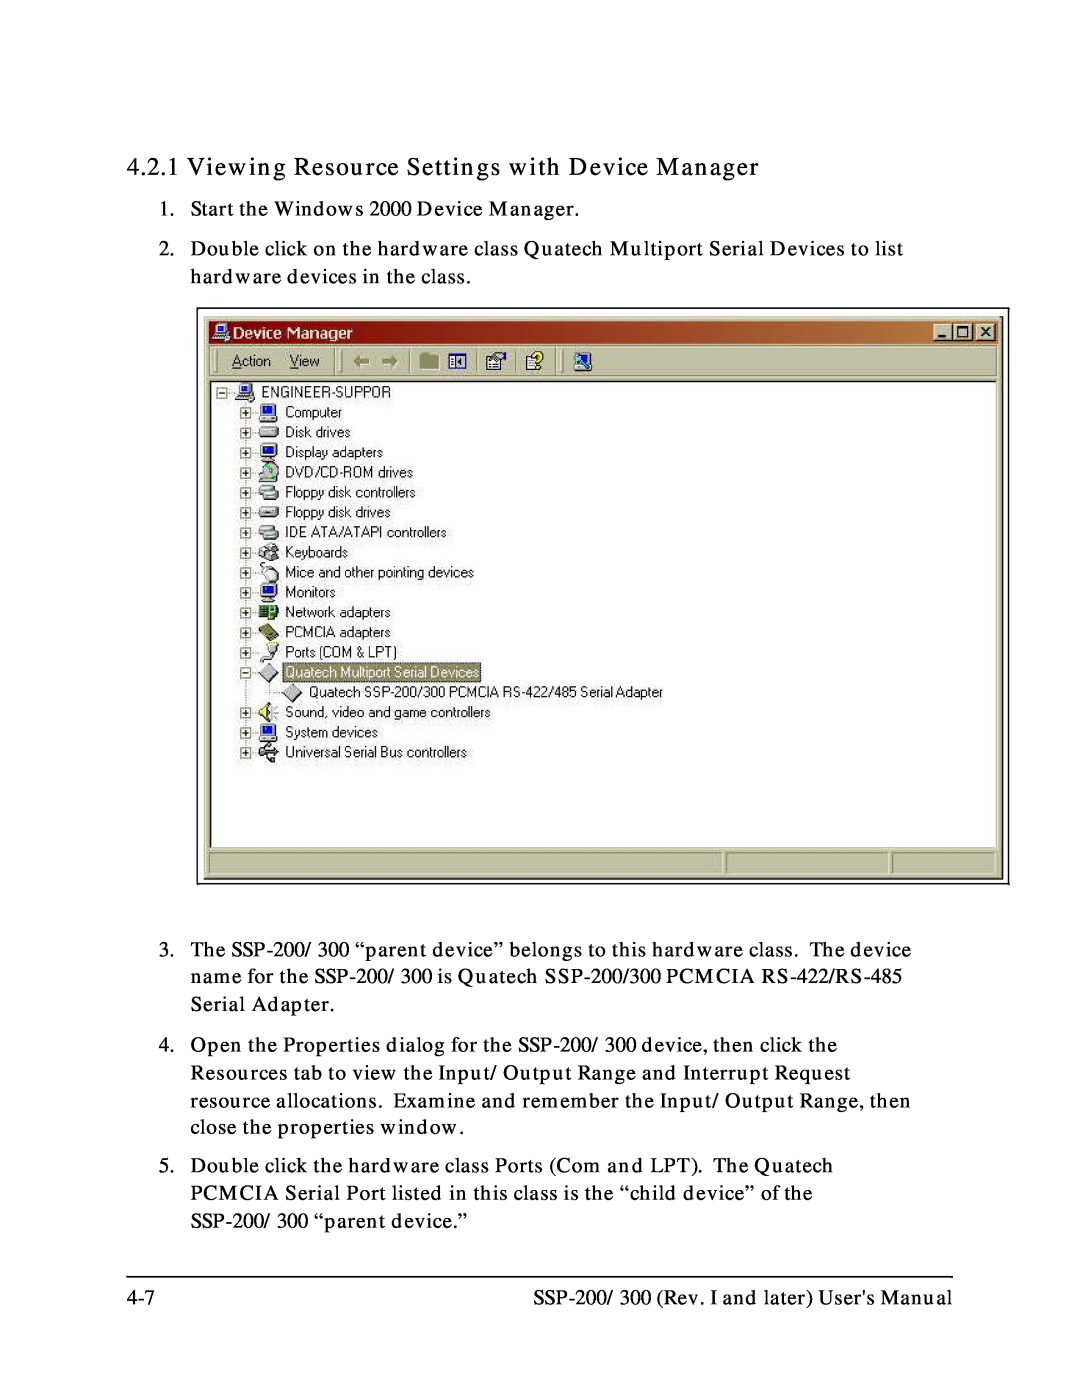 Quatech SSP-200, SSP-300 user manual Viewing Resource Settings with Device Manager 